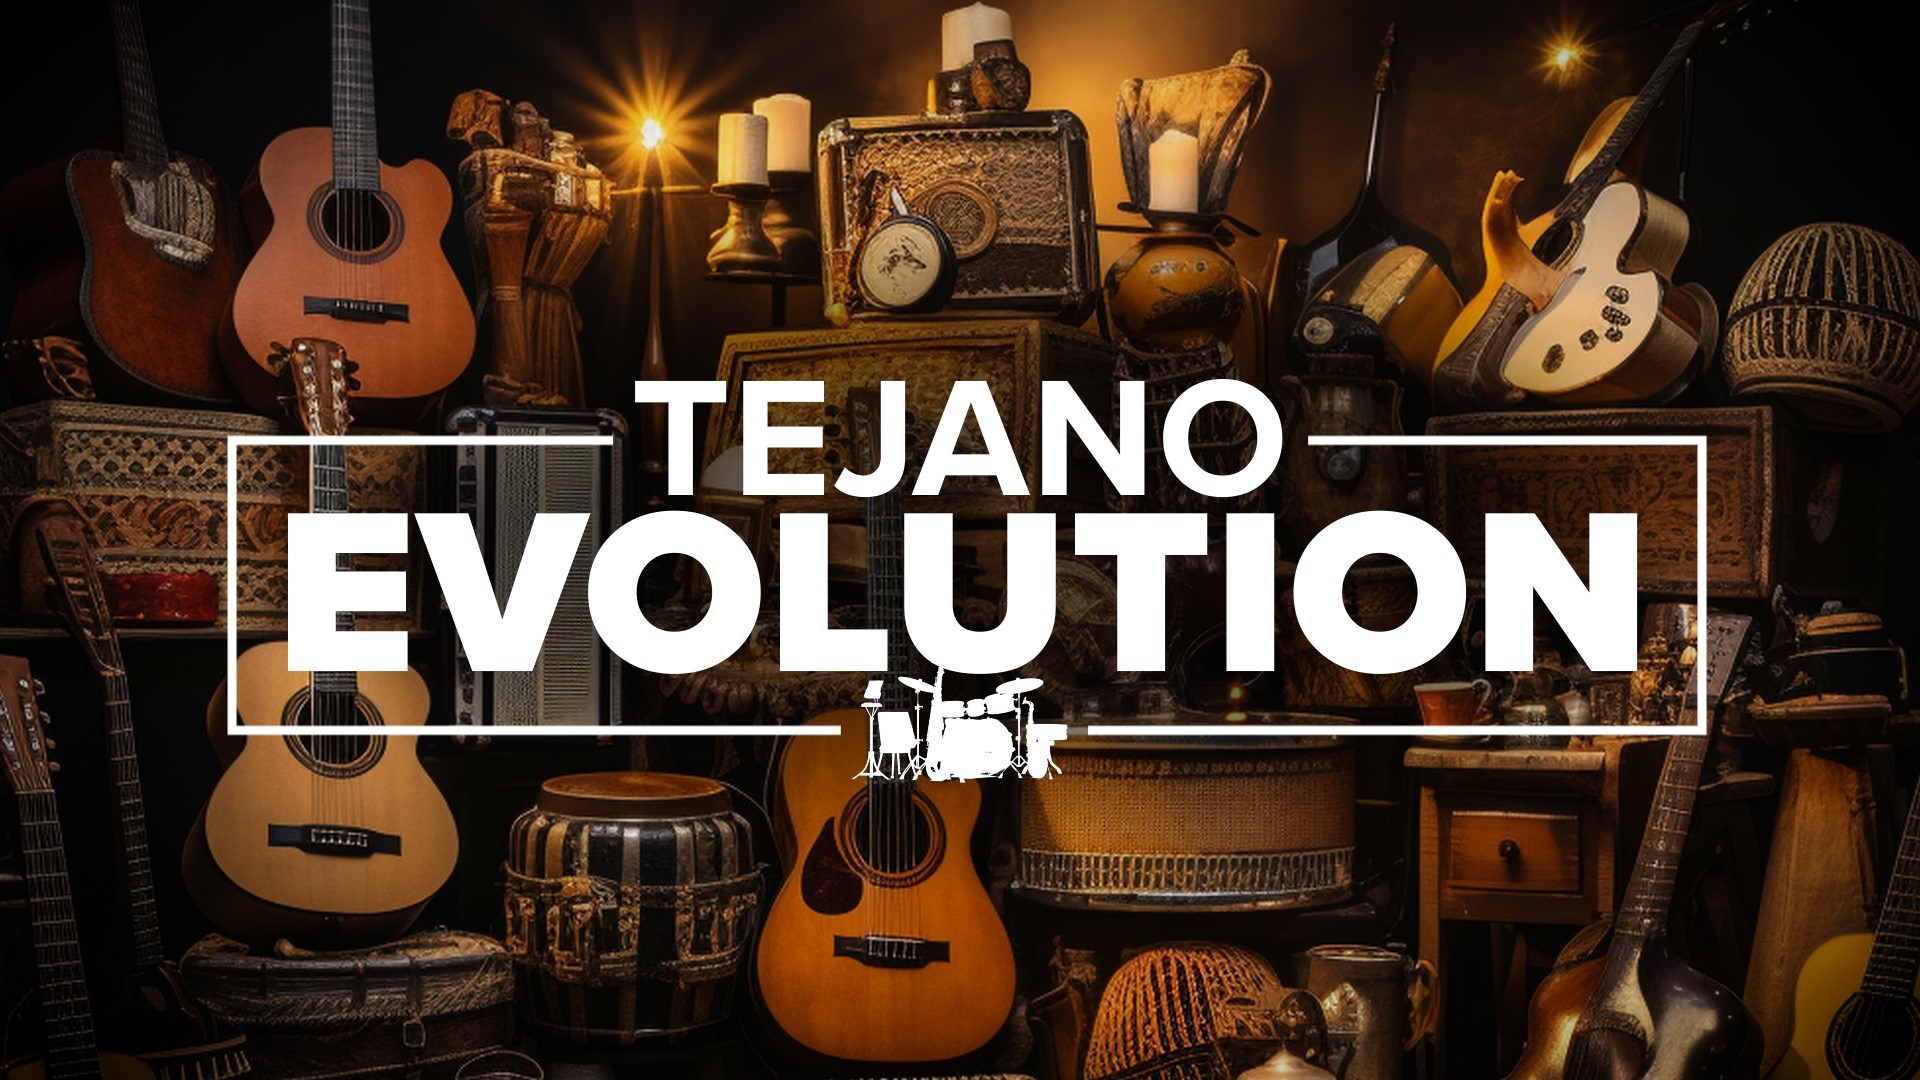 Domingo Live's Rudy Treviño takes a look at how Tejano much has changed -- from its inception through the Selena years until today.